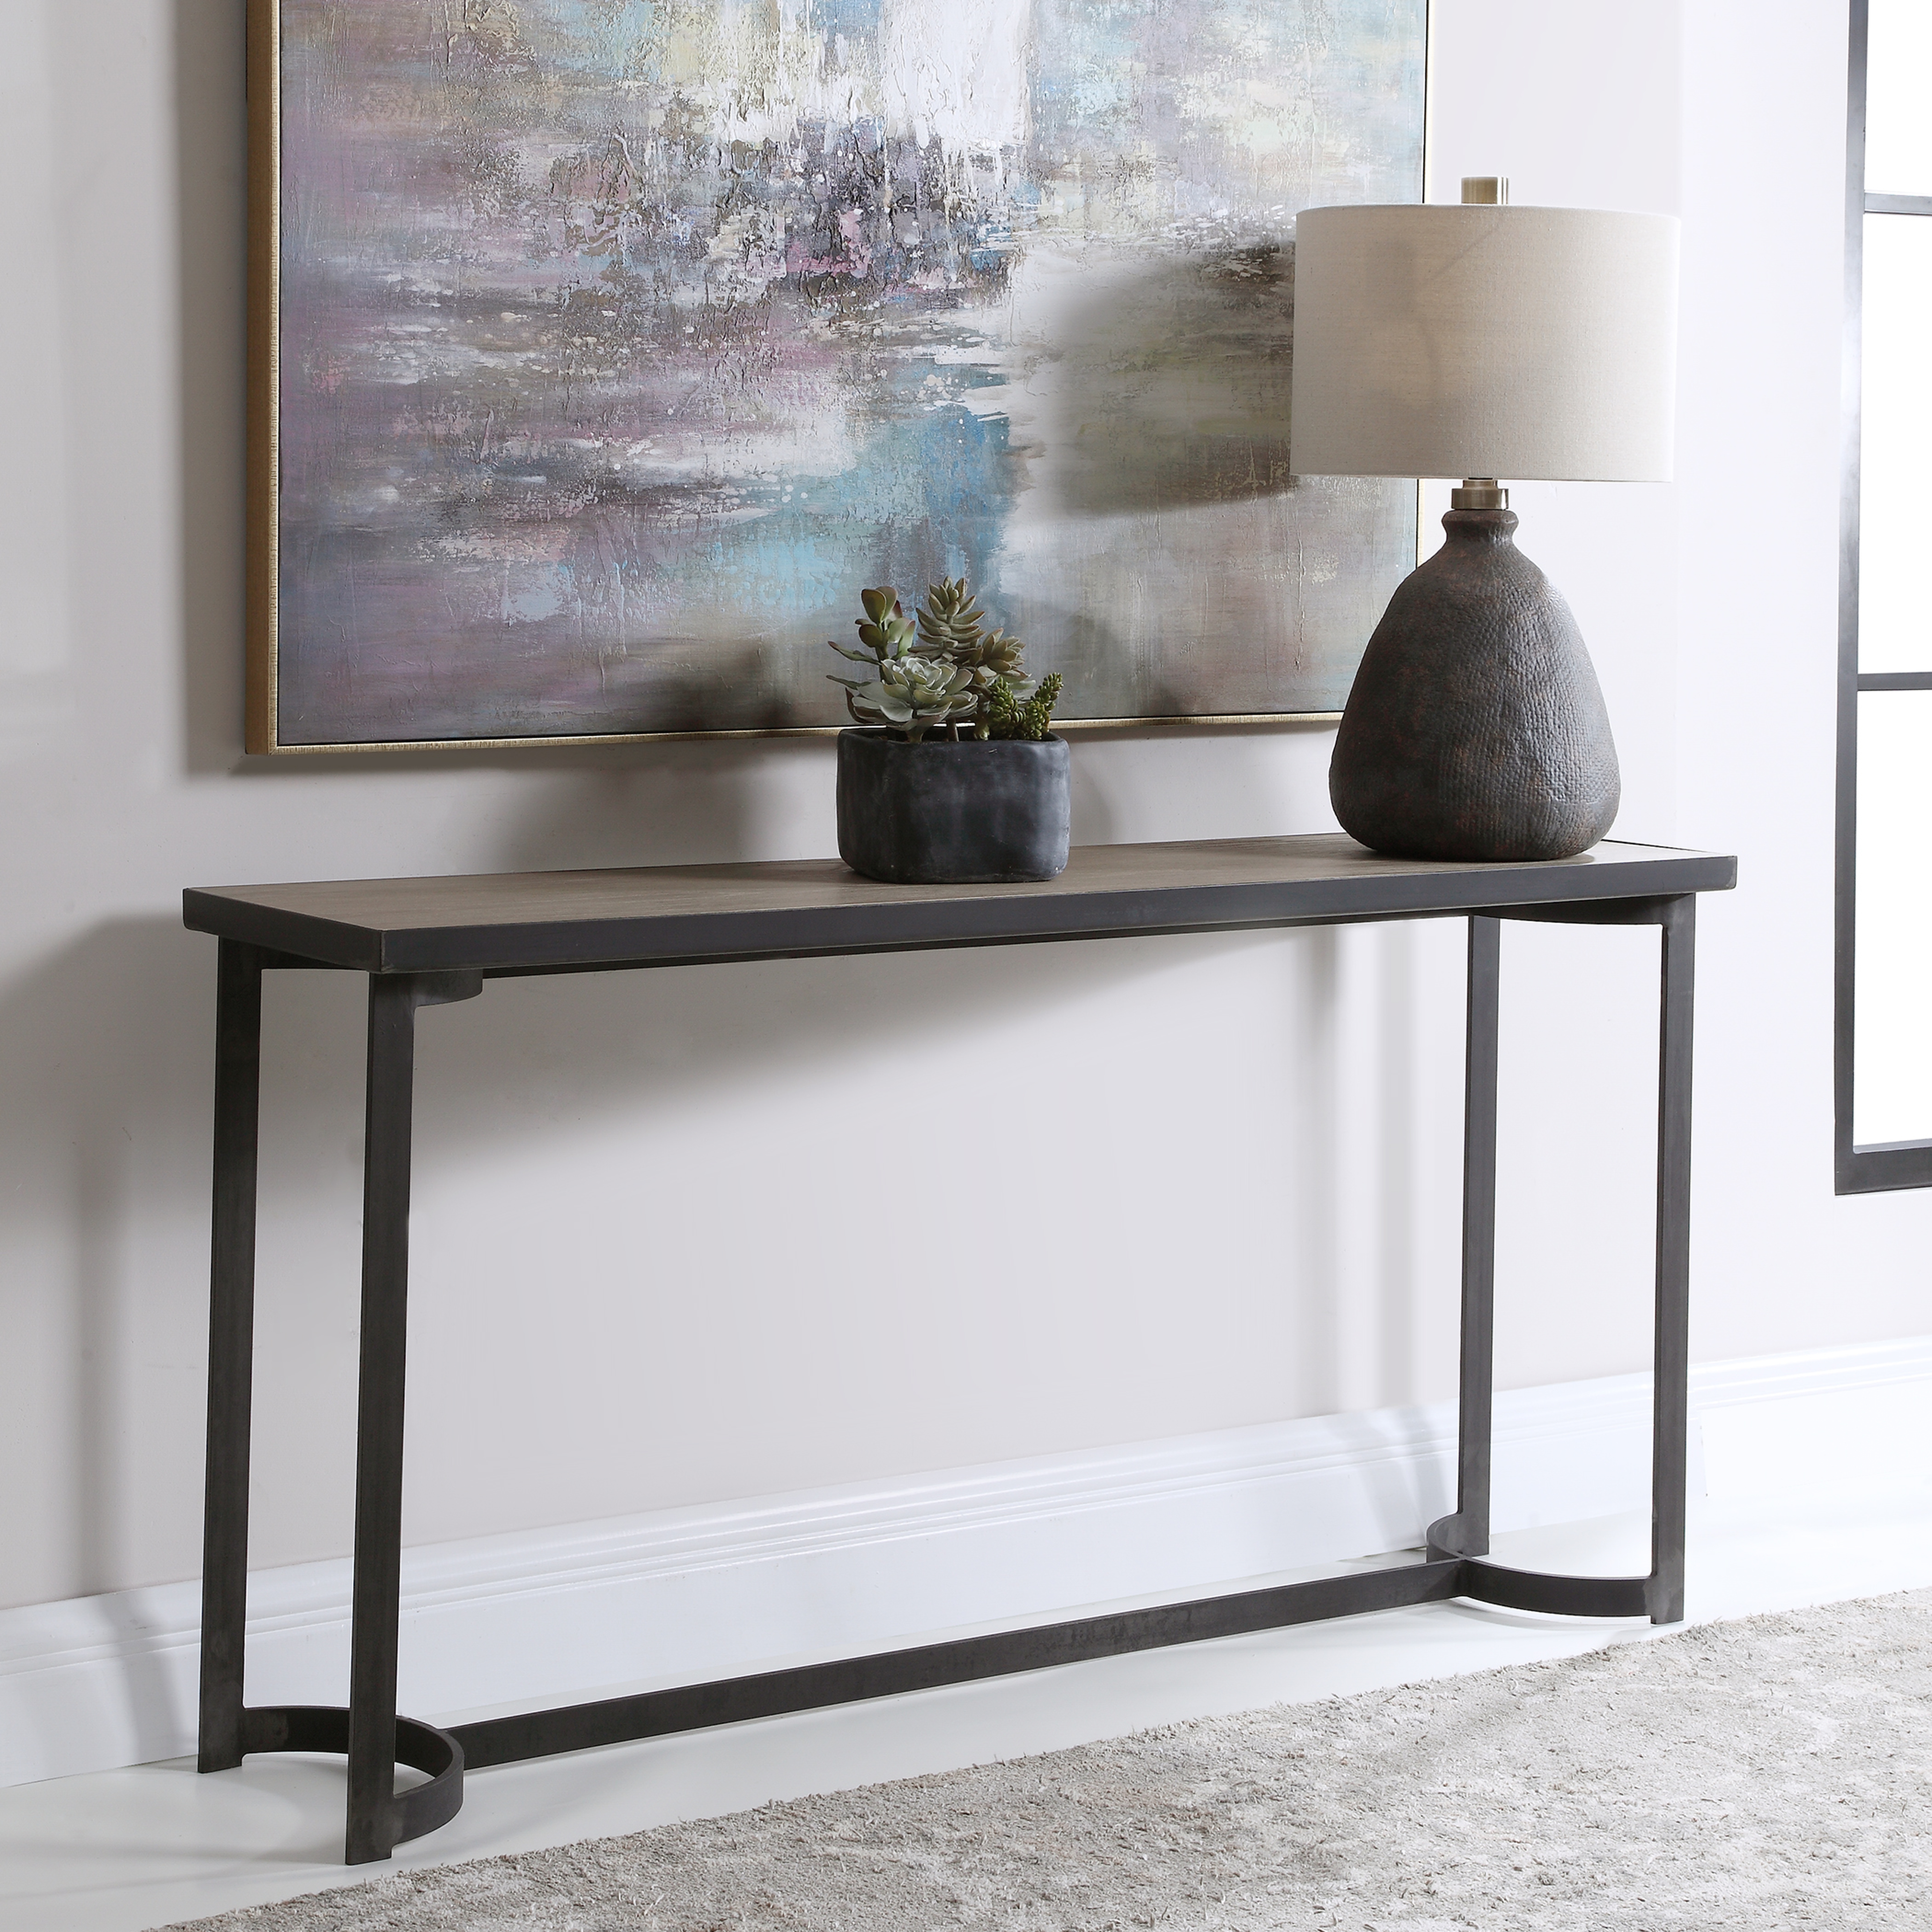 Basuto Steel Console Table - Hudsonhill Foundry